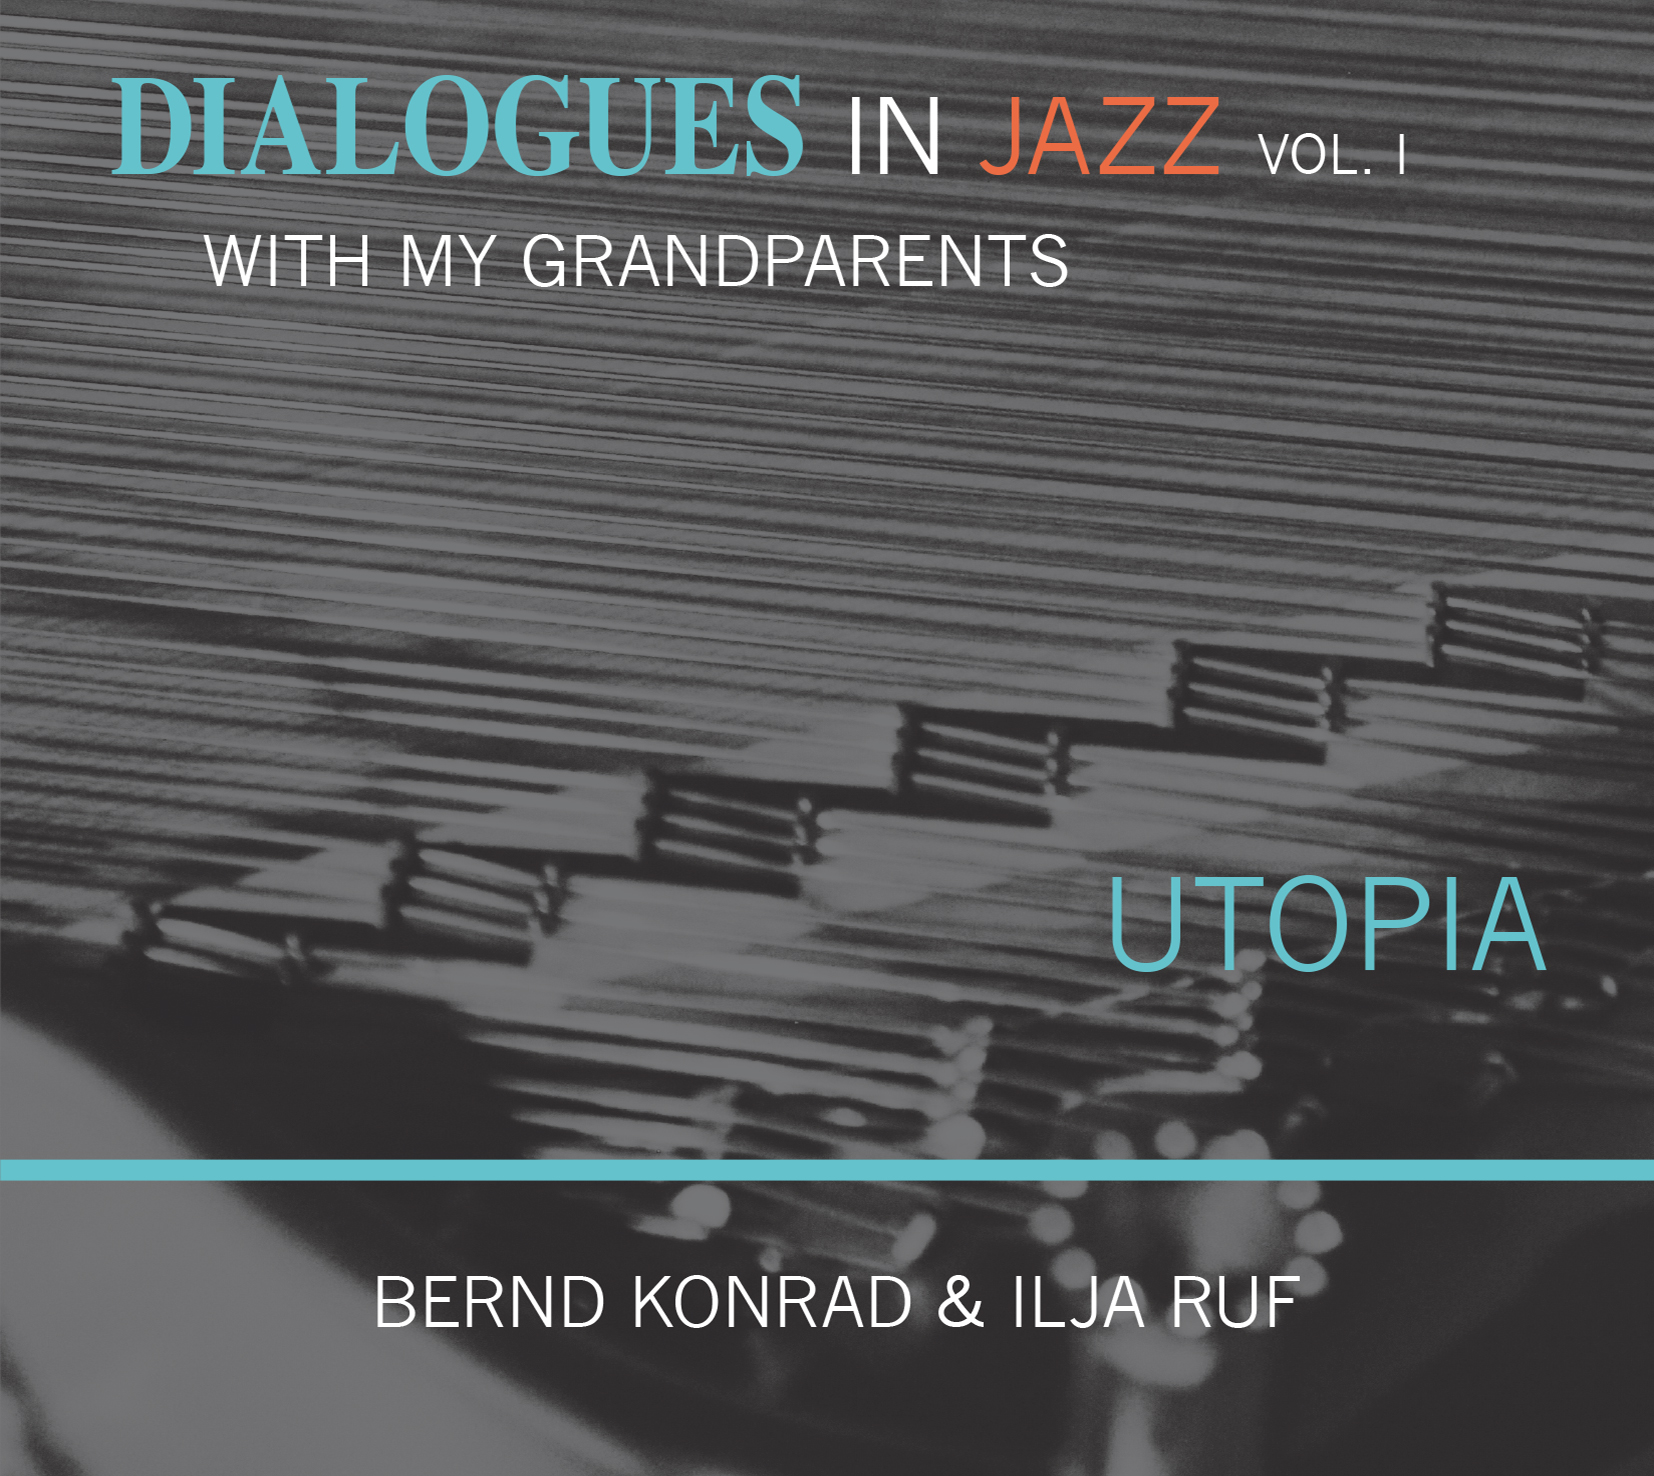 Album Cover - Dialogues in Jazz with my grandparents vol. 1 